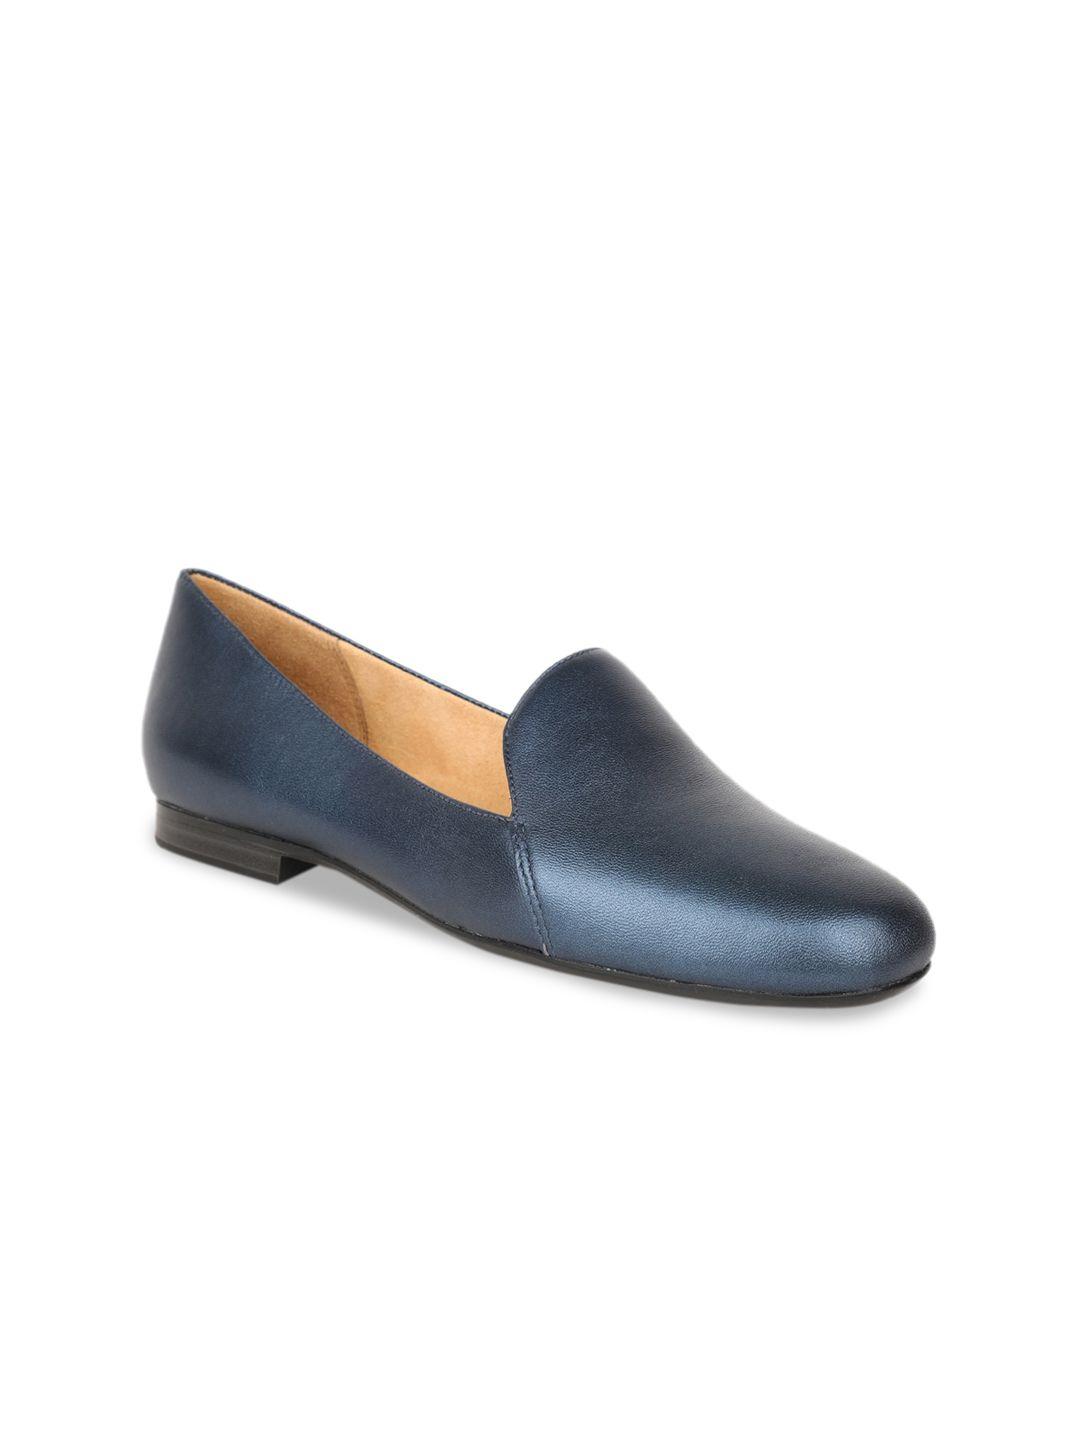 naturalizer women navy blue leather loafers